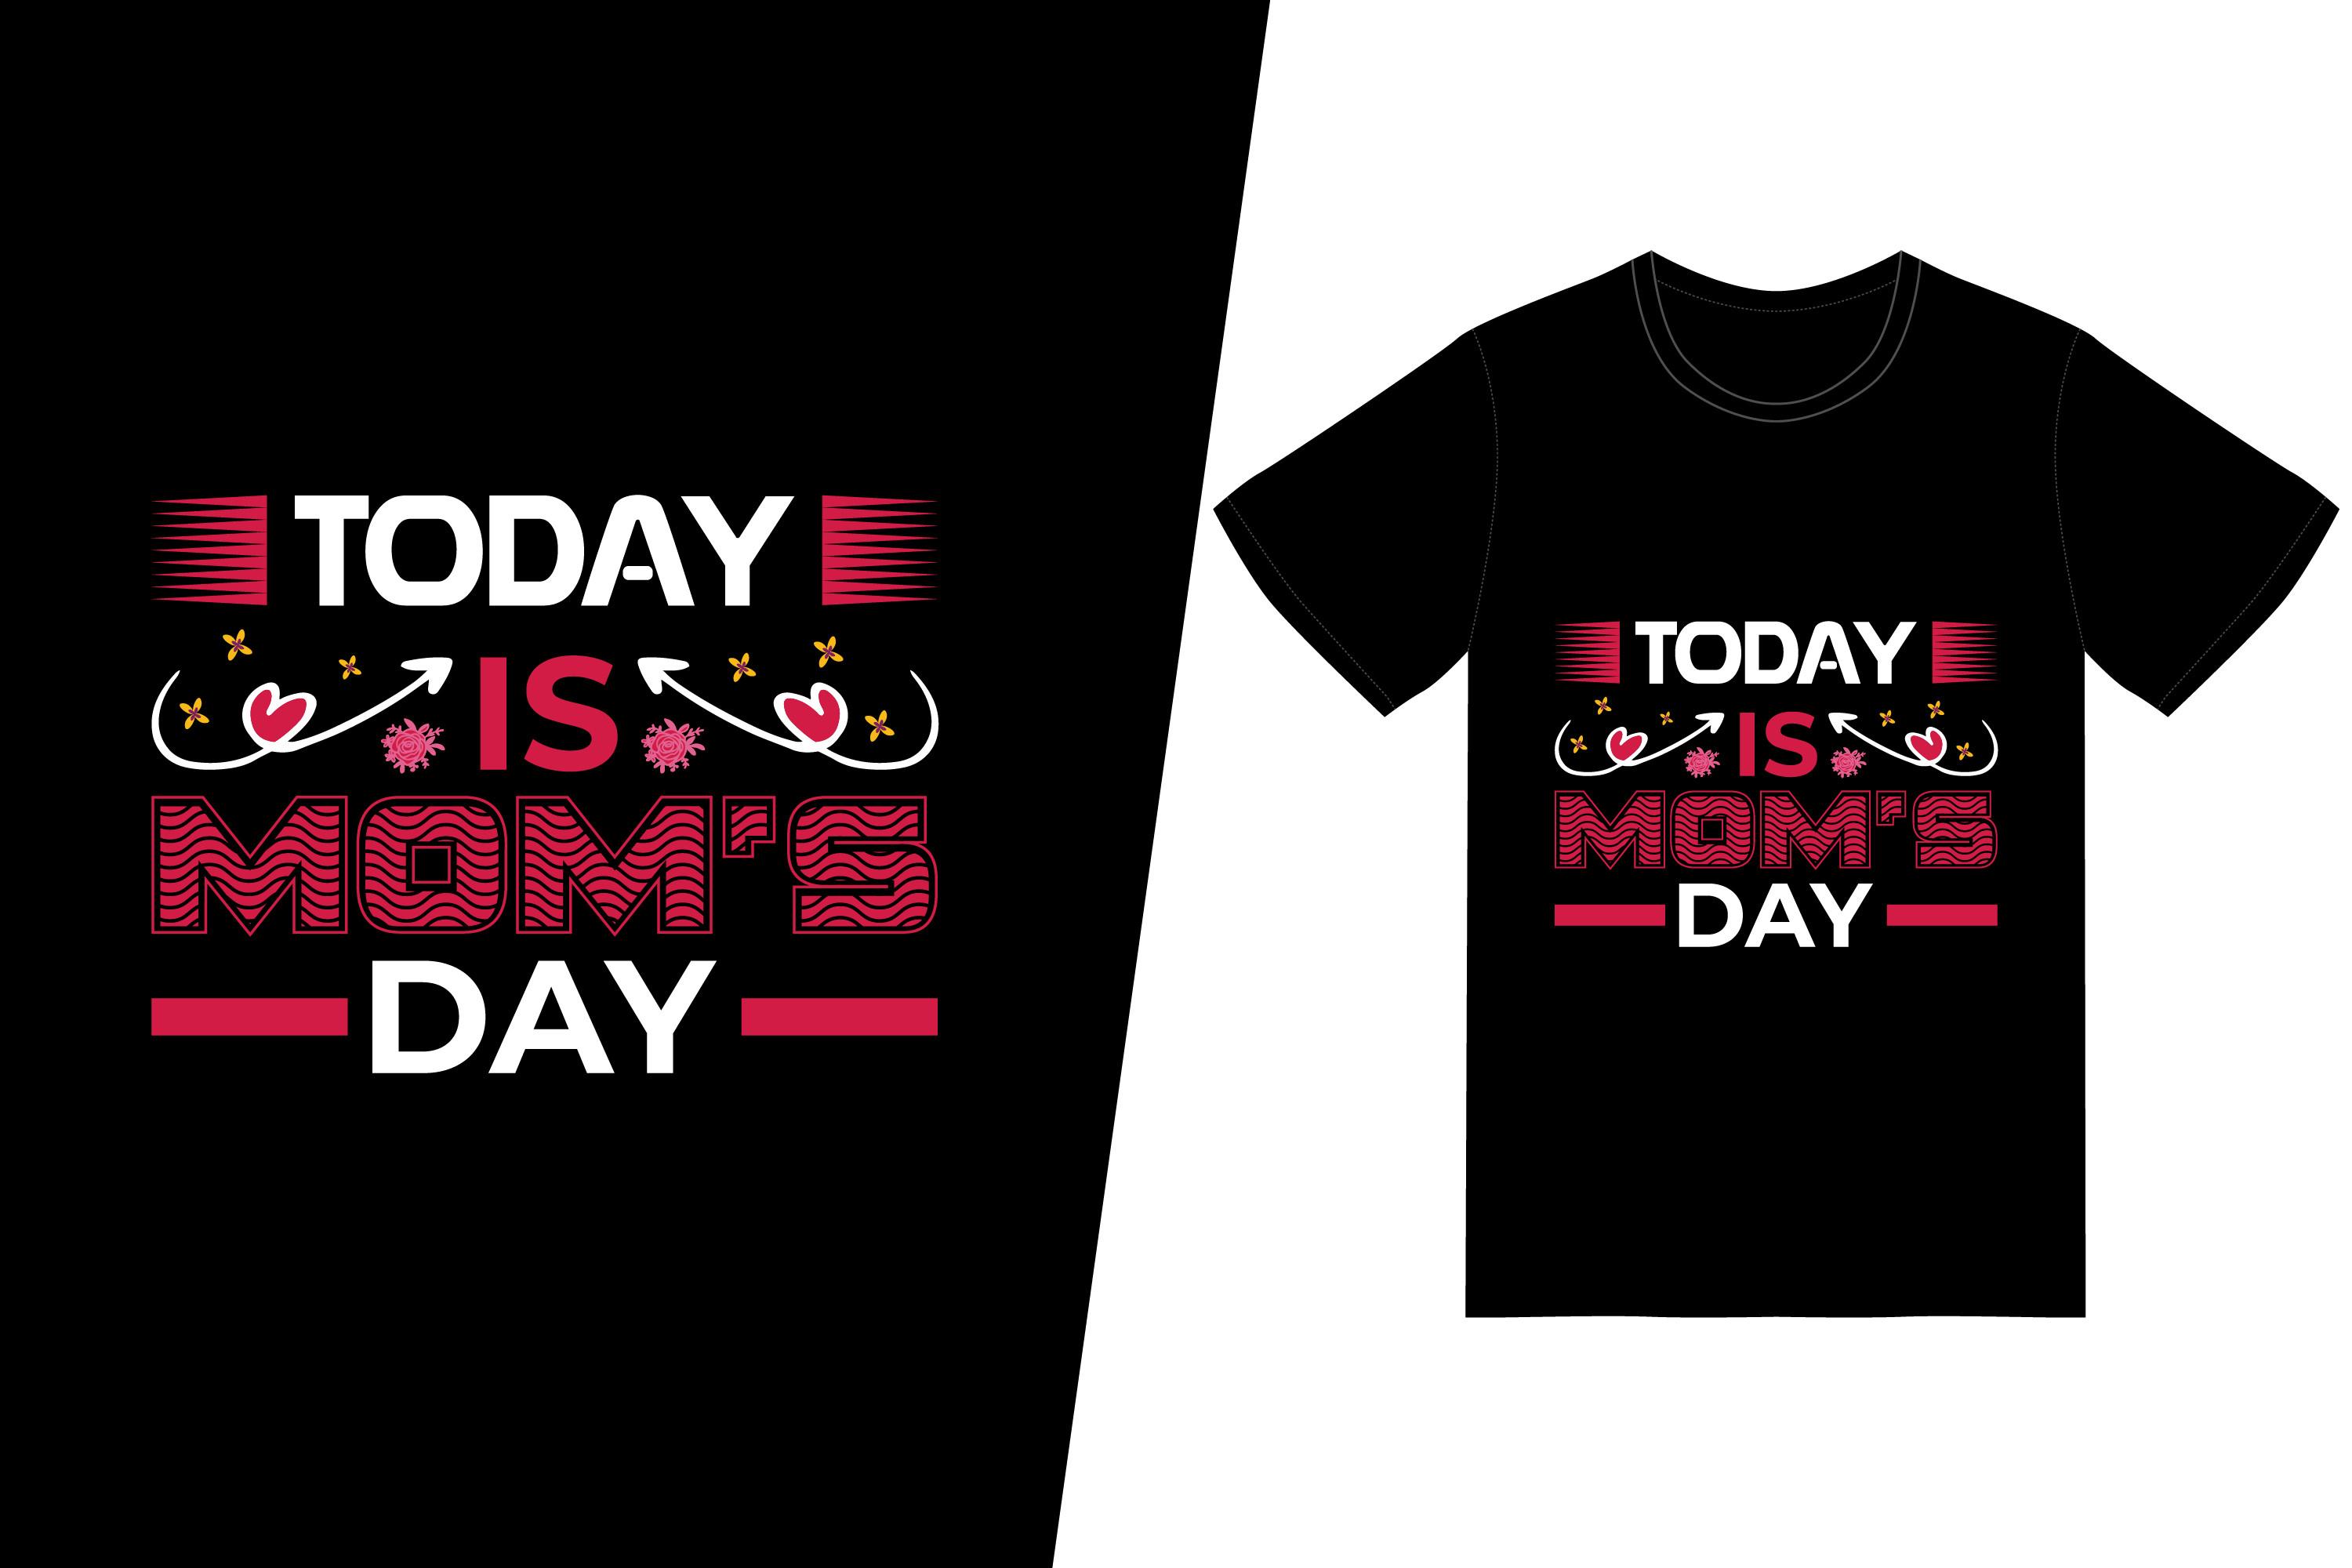 Today is Mom's Day T-shirt Design